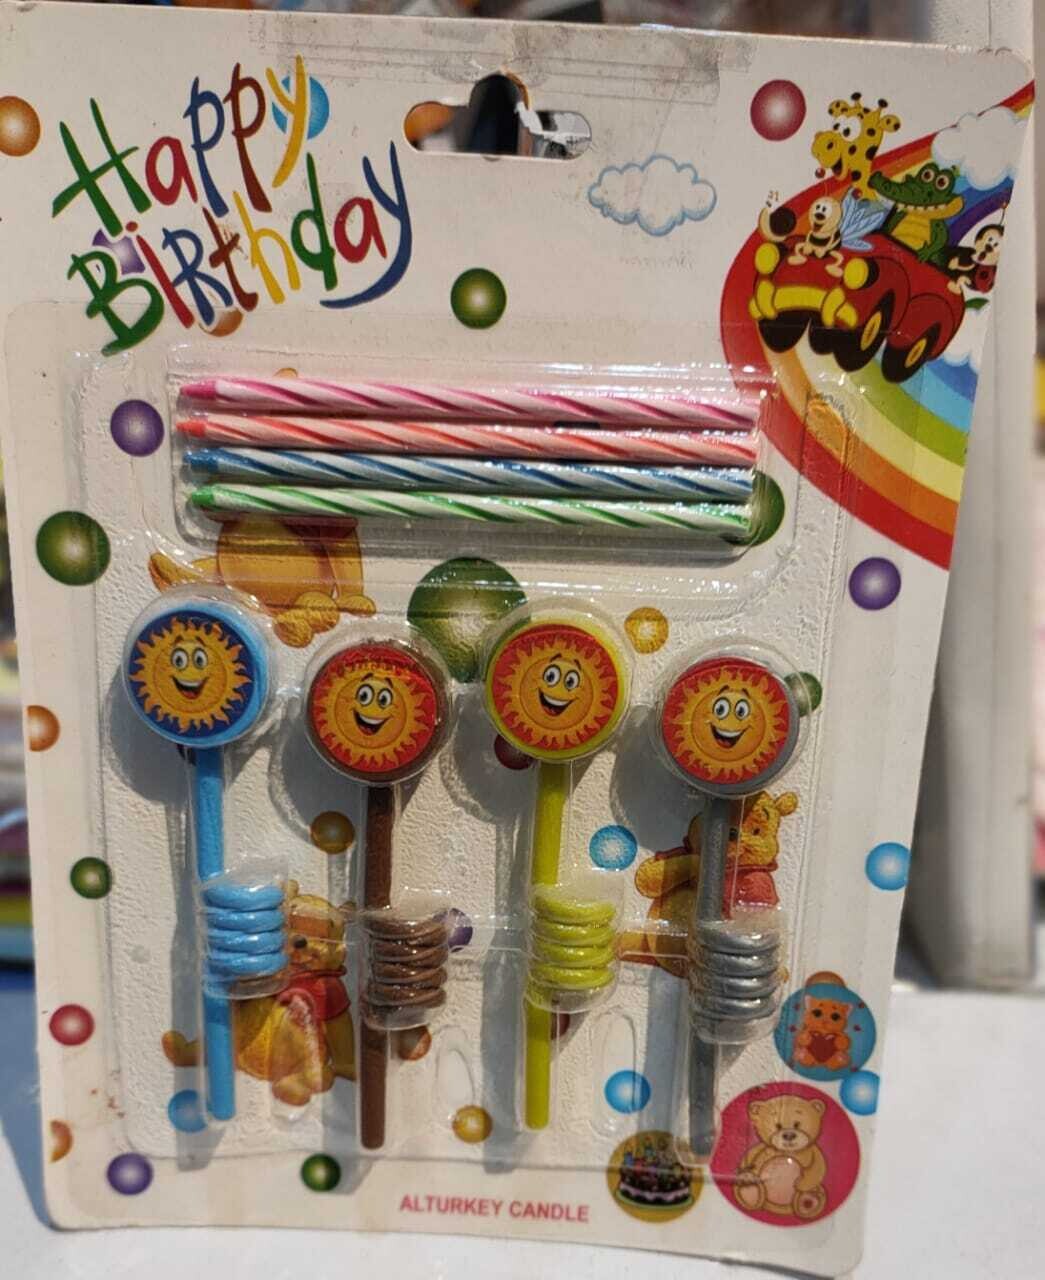 Happy birthday candles with different shapes and spiral base